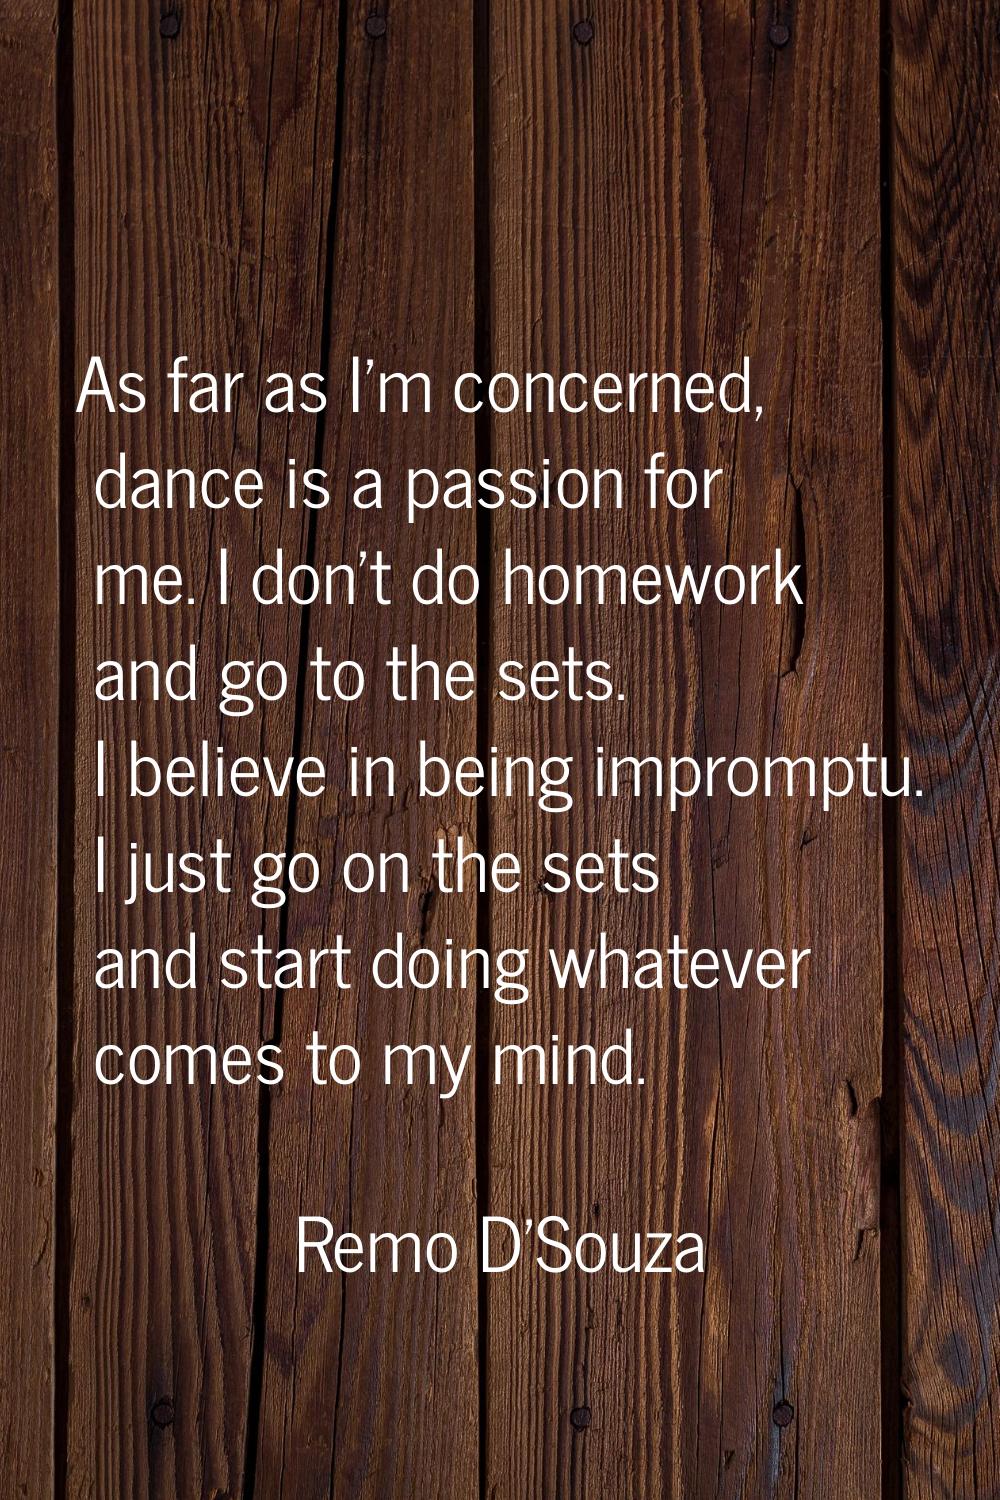 As far as I'm concerned, dance is a passion for me. I don't do homework and go to the sets. I belie